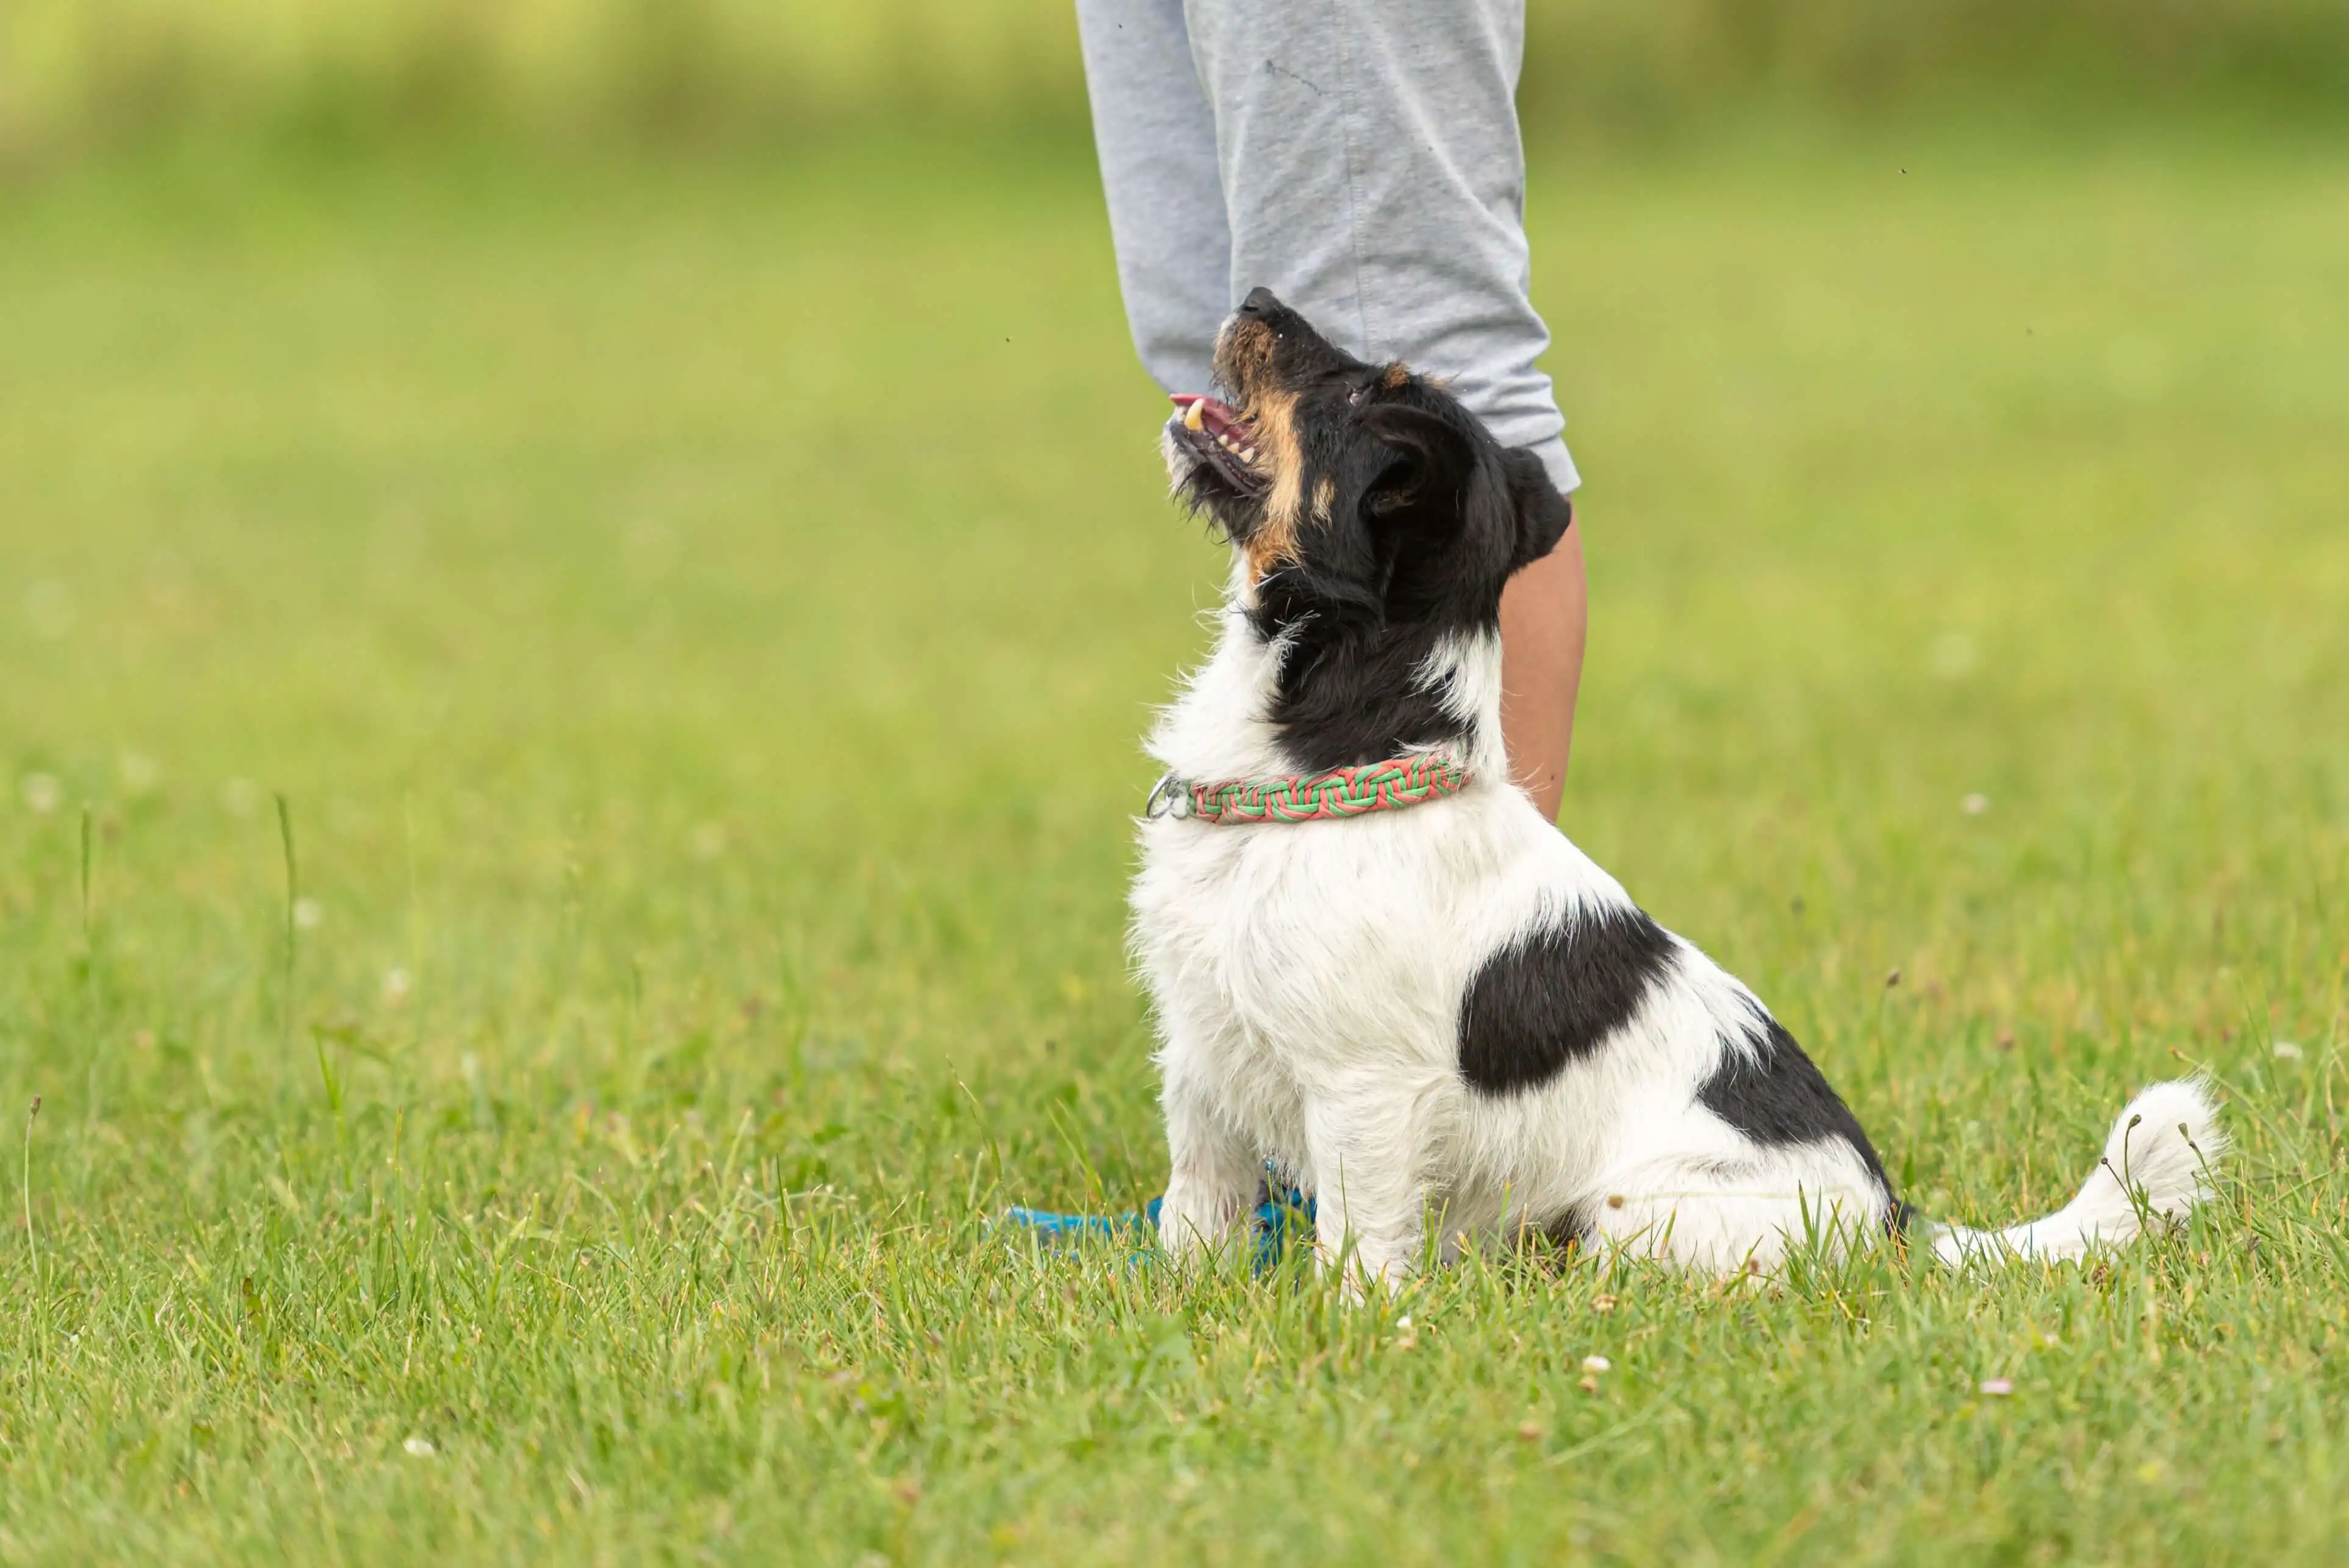 Small black and white dog sitting on grass with owner